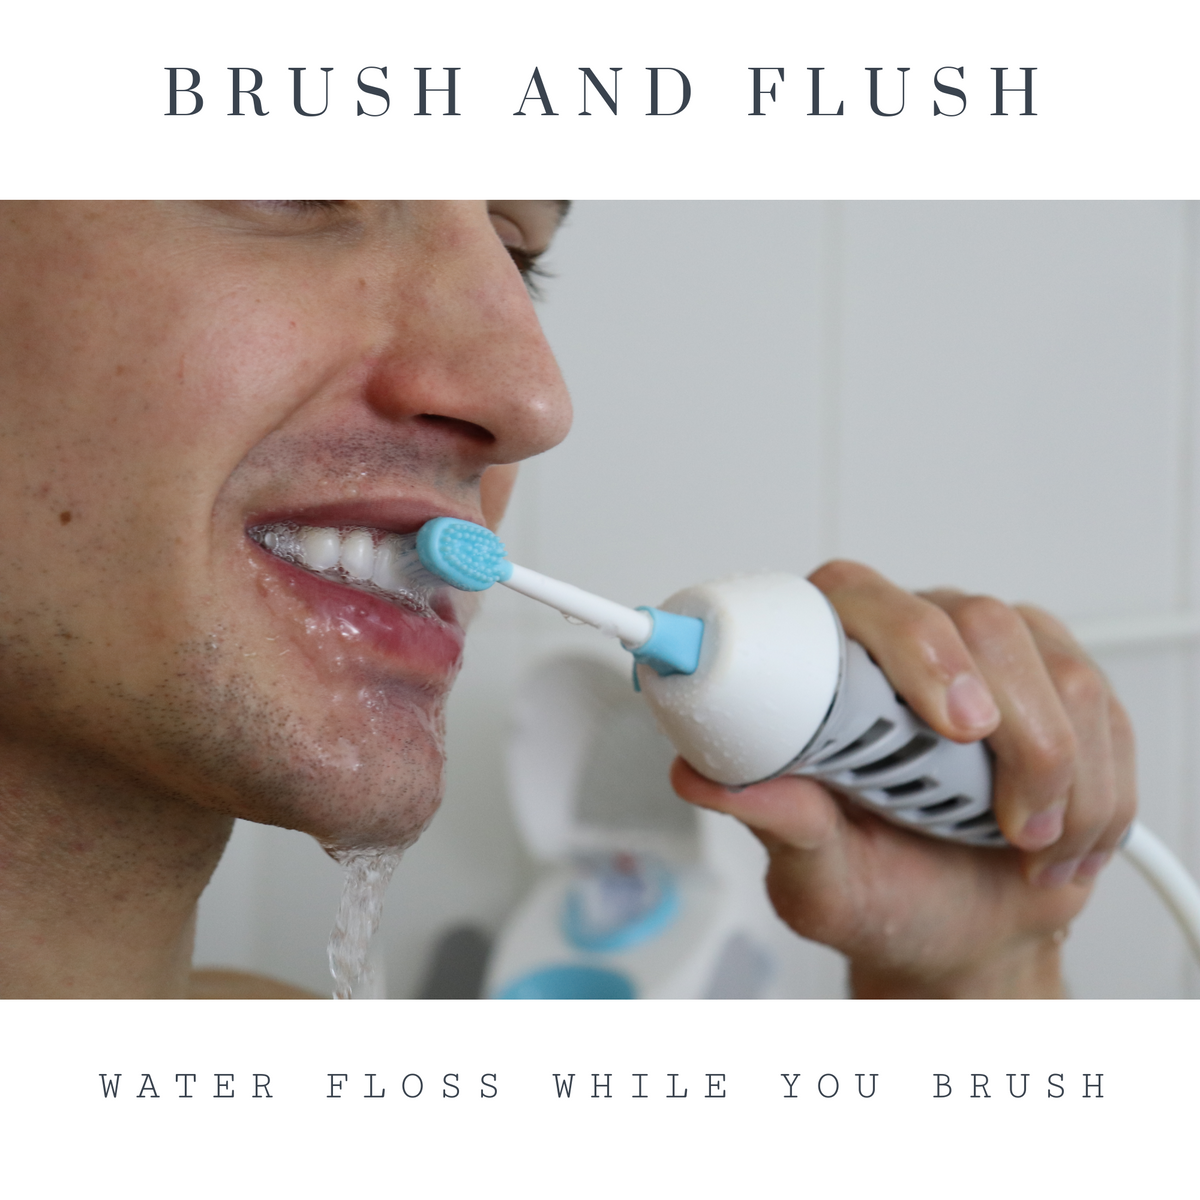 shower flossing your teeth with an irrigating toothbrush 